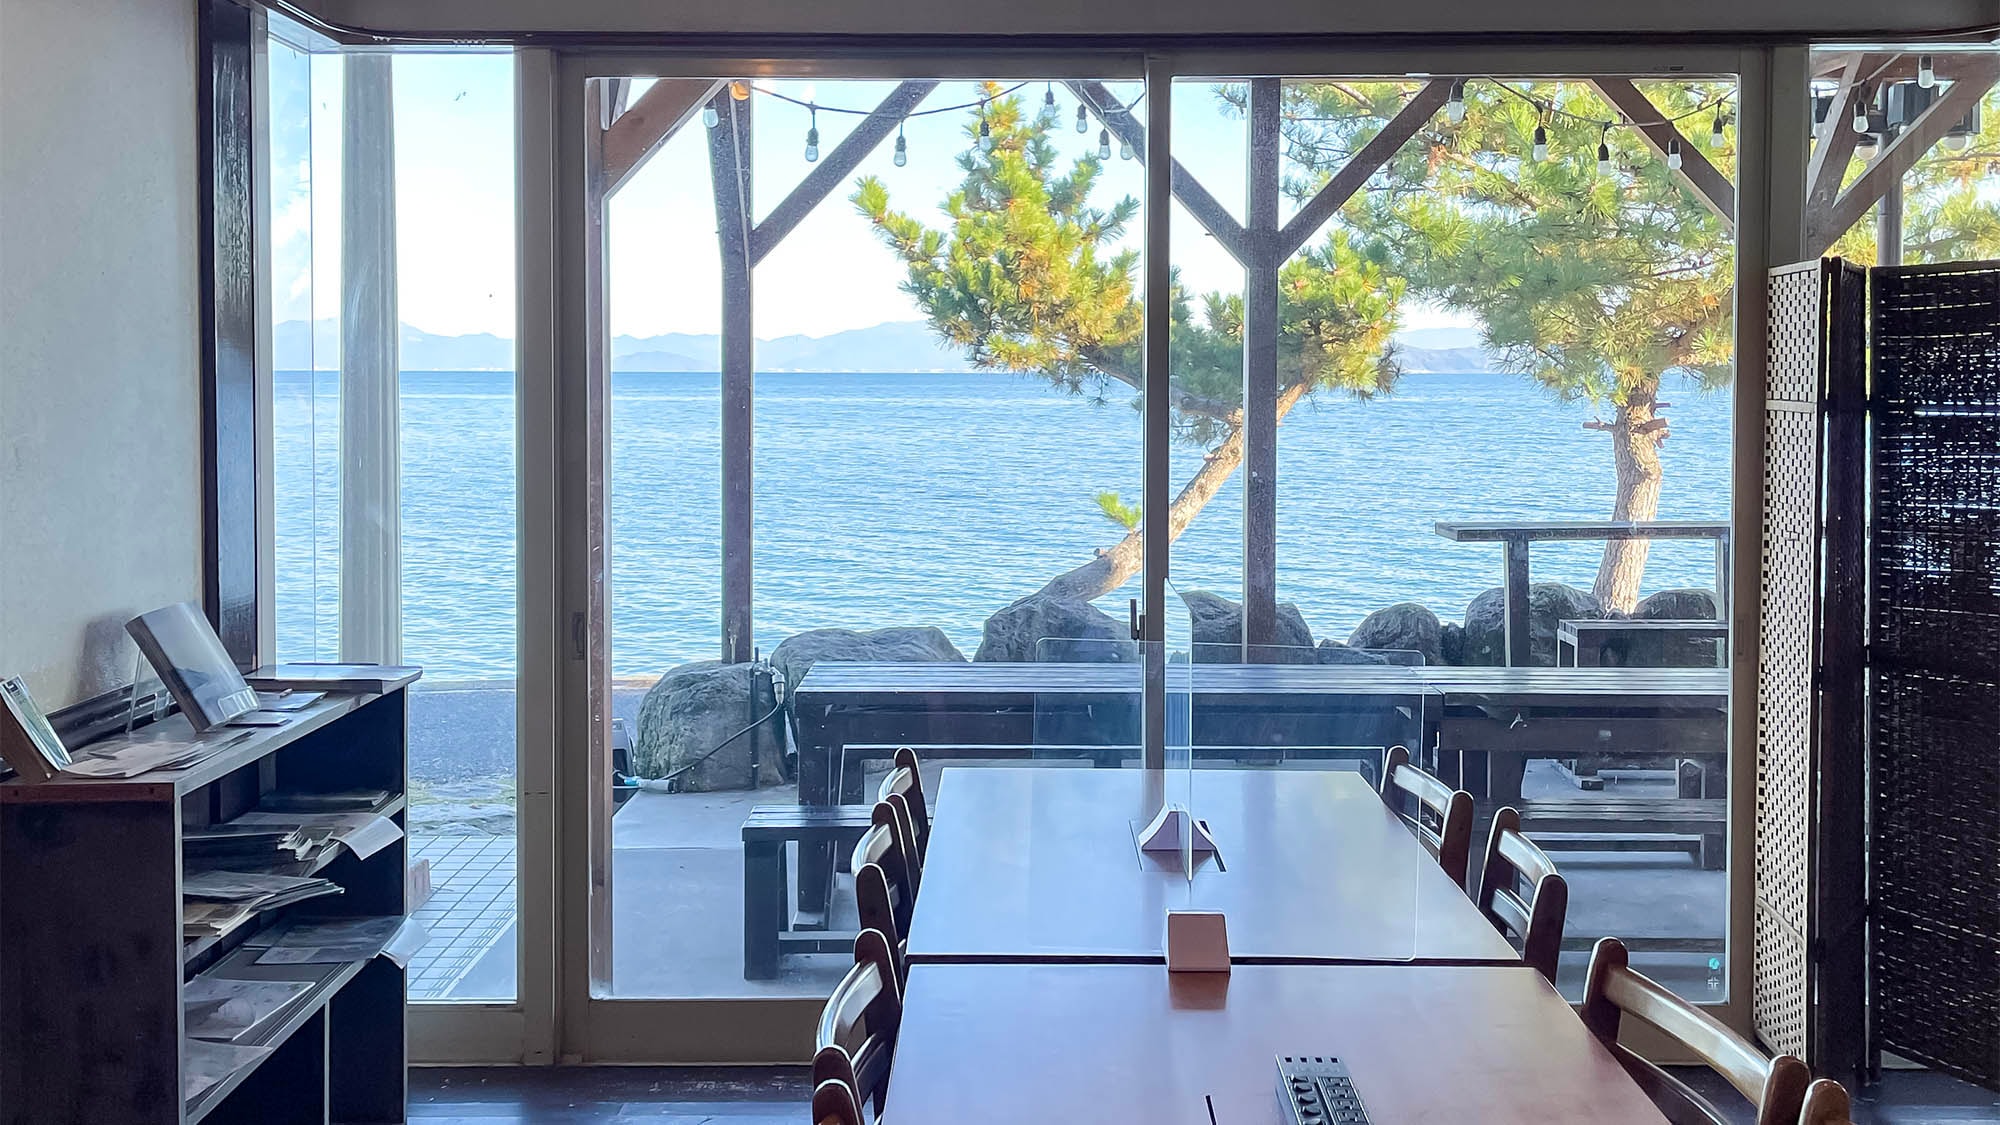 ・ It is a restaurant where you can enjoy the refreshing scenery.